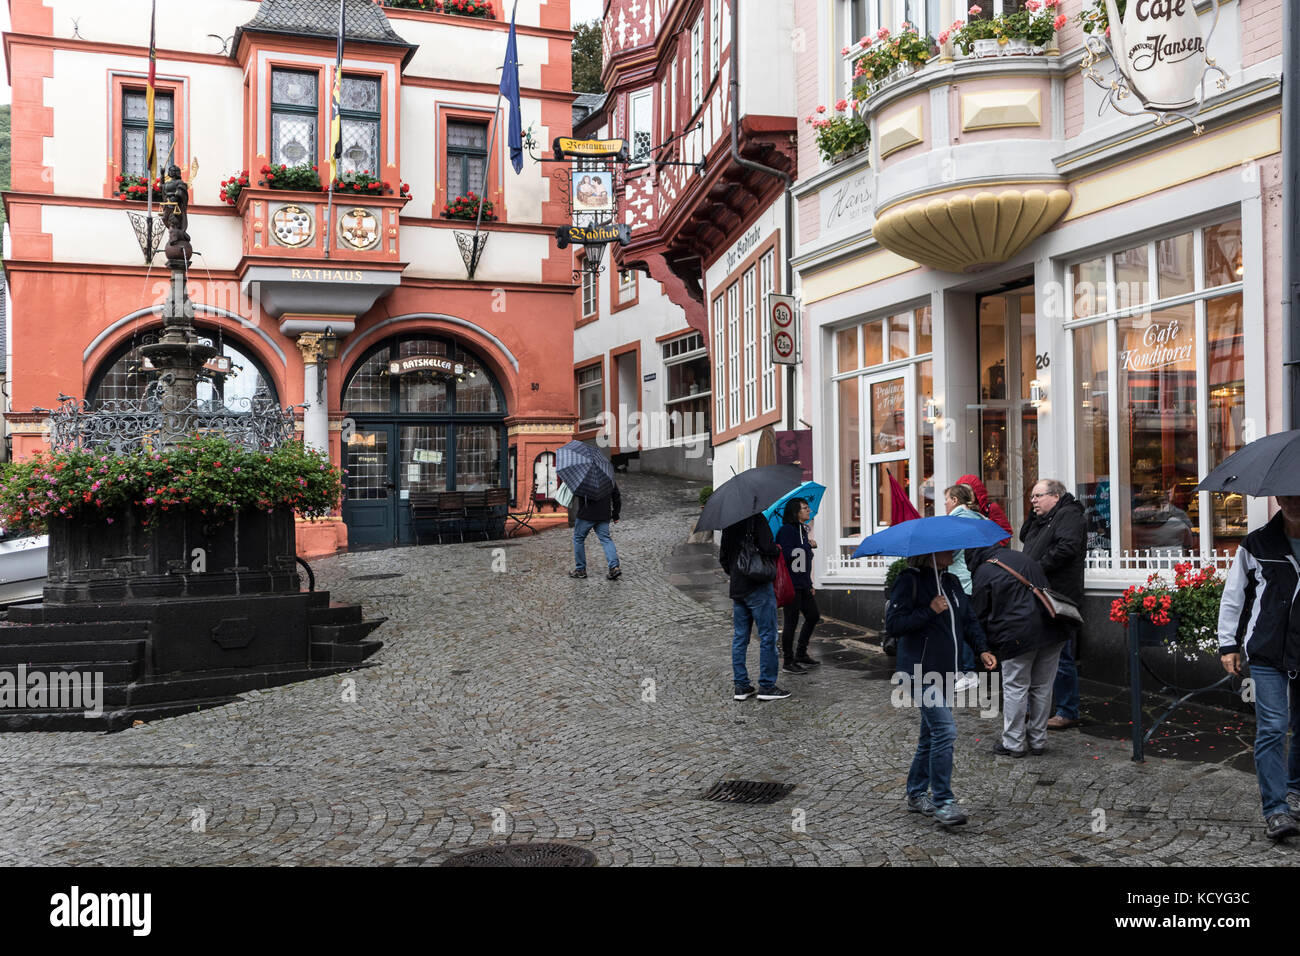 A wet, rainy day at the town of Bernkastel-Kues, in the Mosel Valley, Germany. The tourists have umbrellas to protect from the rain. Stock Photo